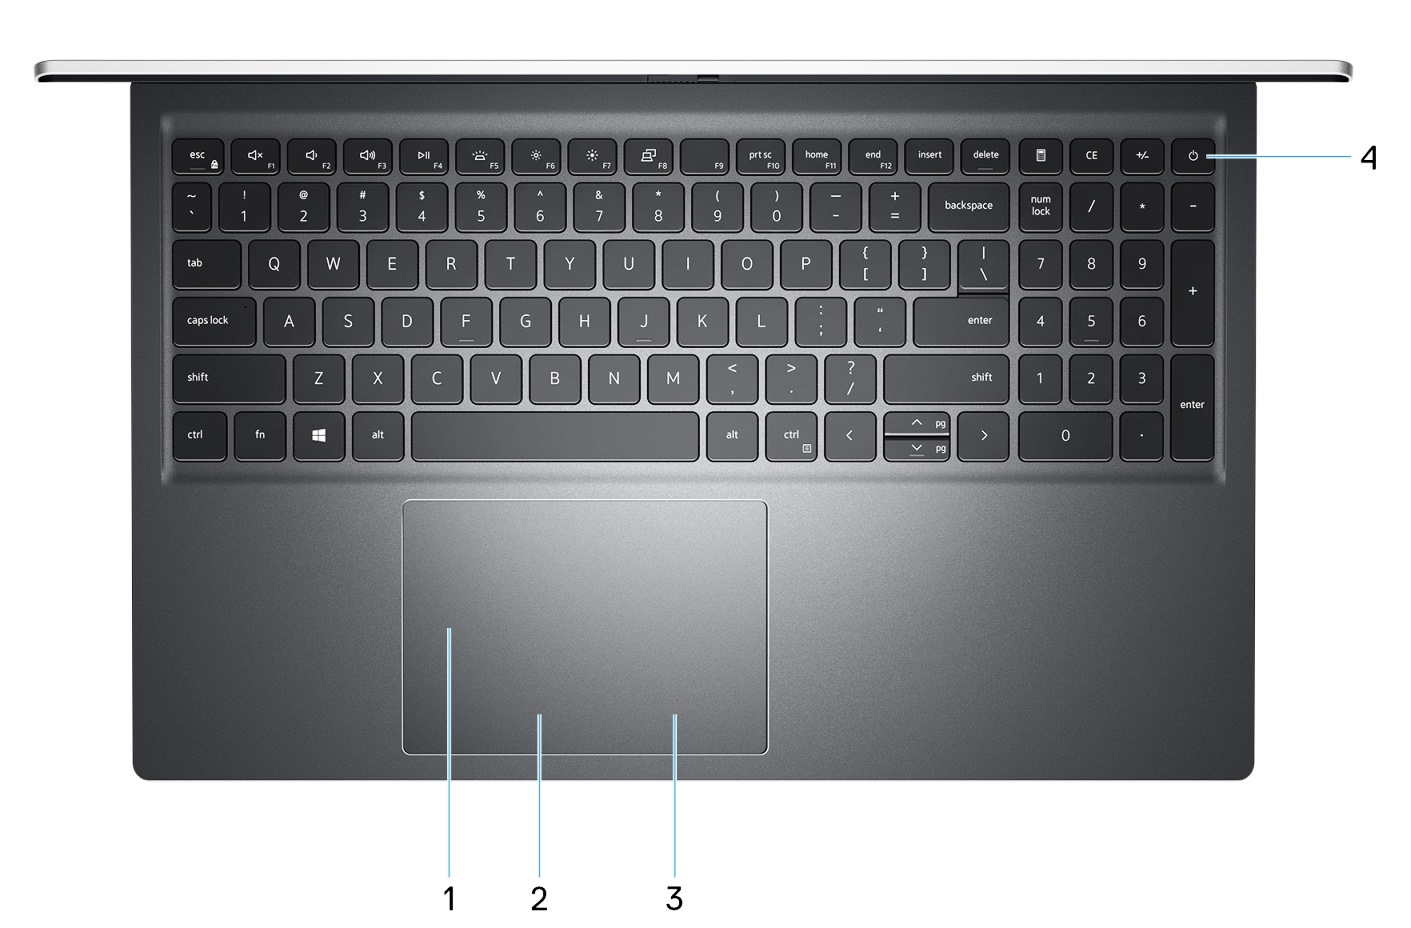 Dell Inspiron 15 5510 - Keyboard View